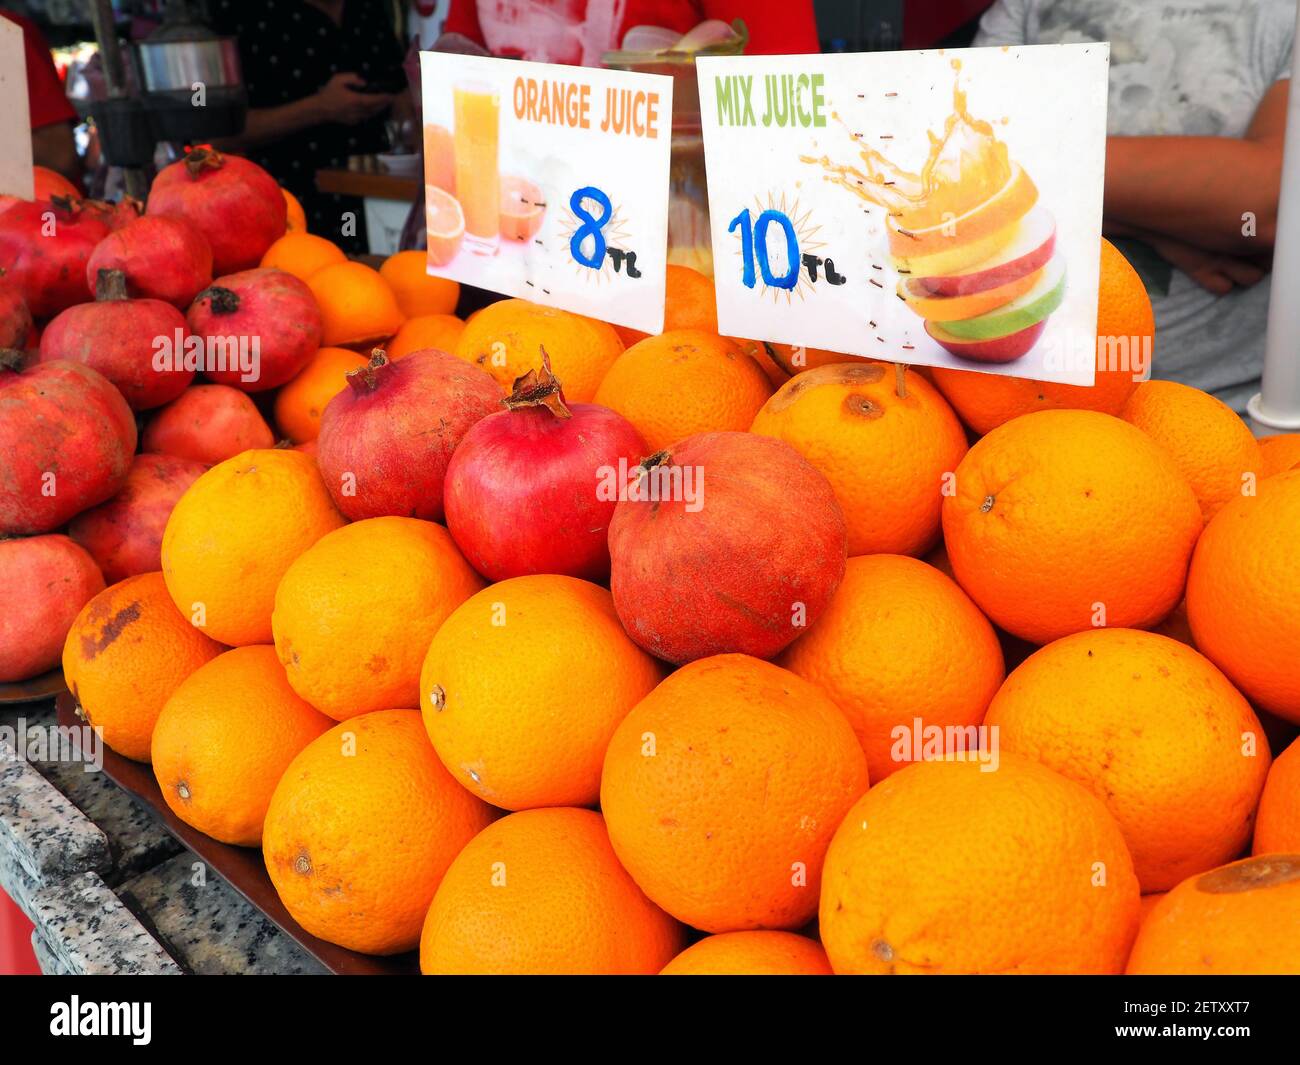 Oranges and pomegranates on counter of local market with price tags for making juice: Istanbul, Turkey - August 22, 2018 Stock Photo